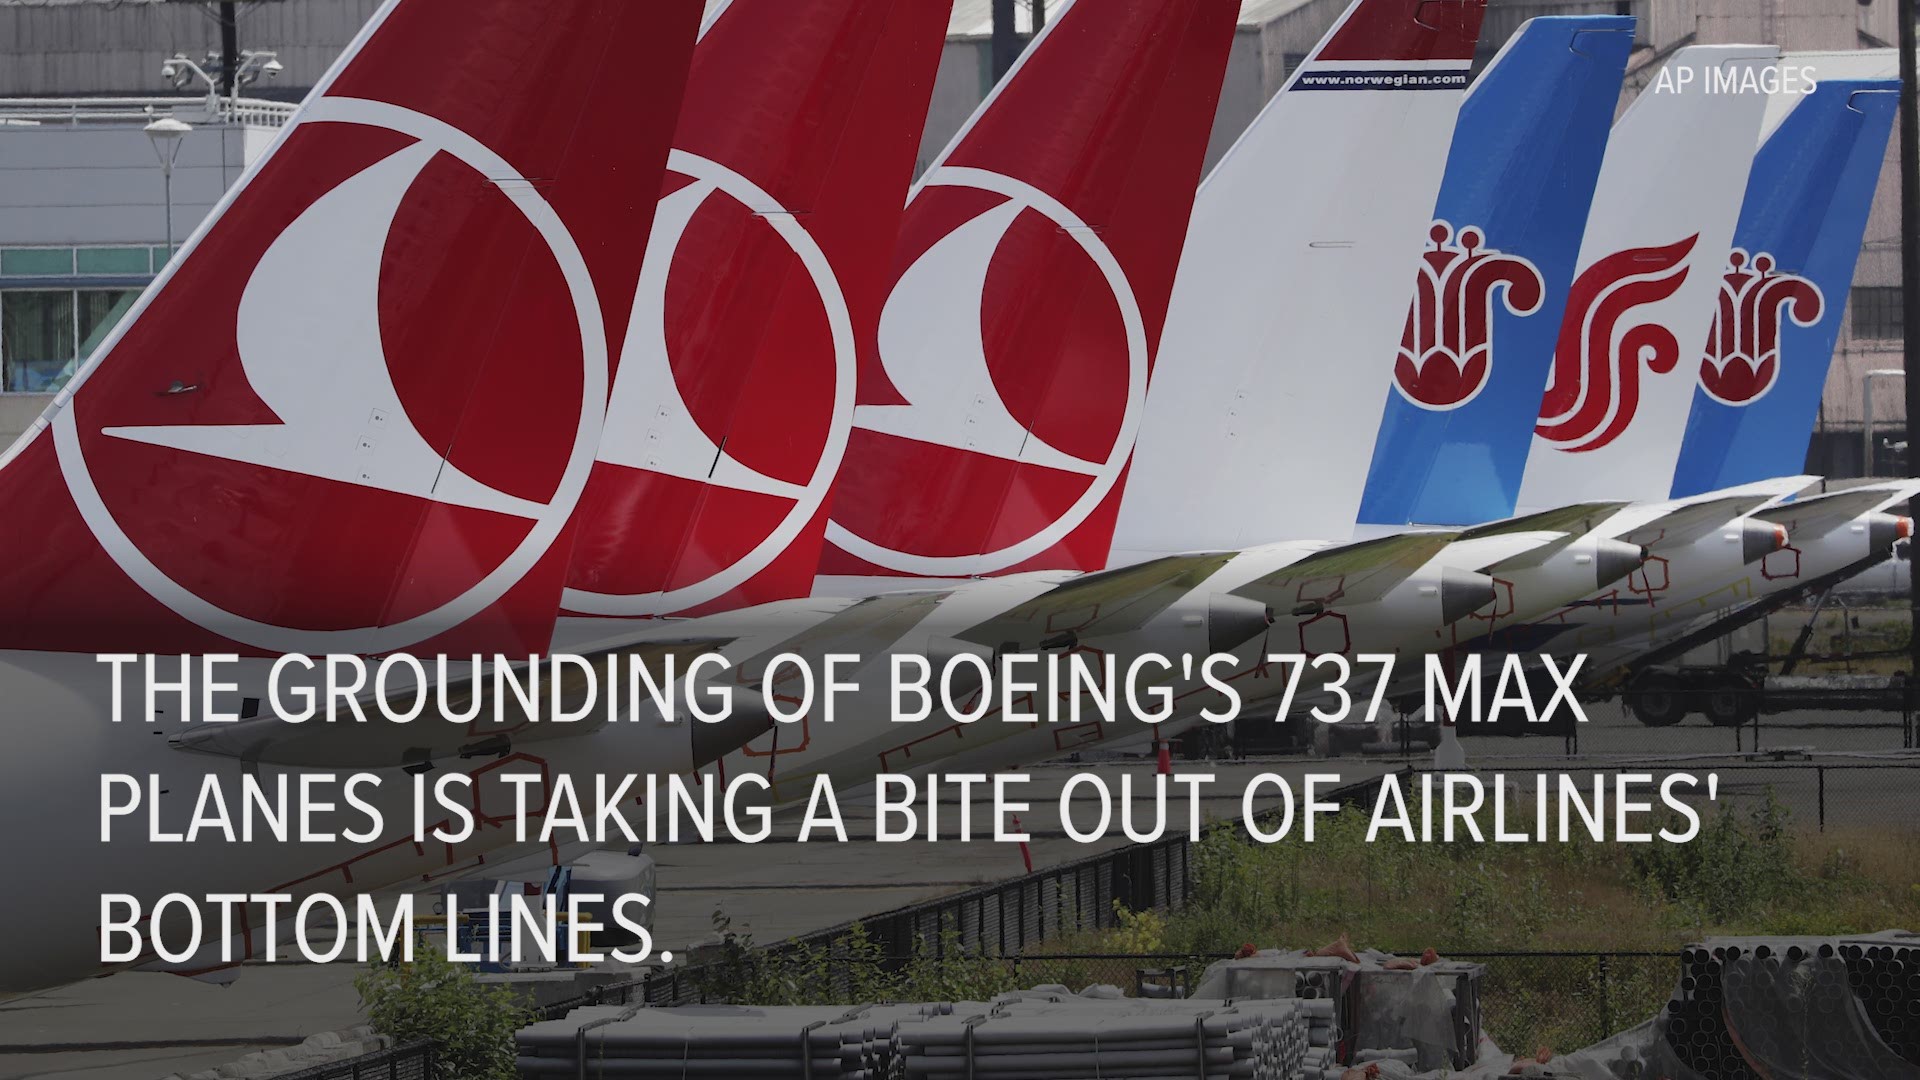 The grounding of Boeing 737 Max planes is costing airlines money.